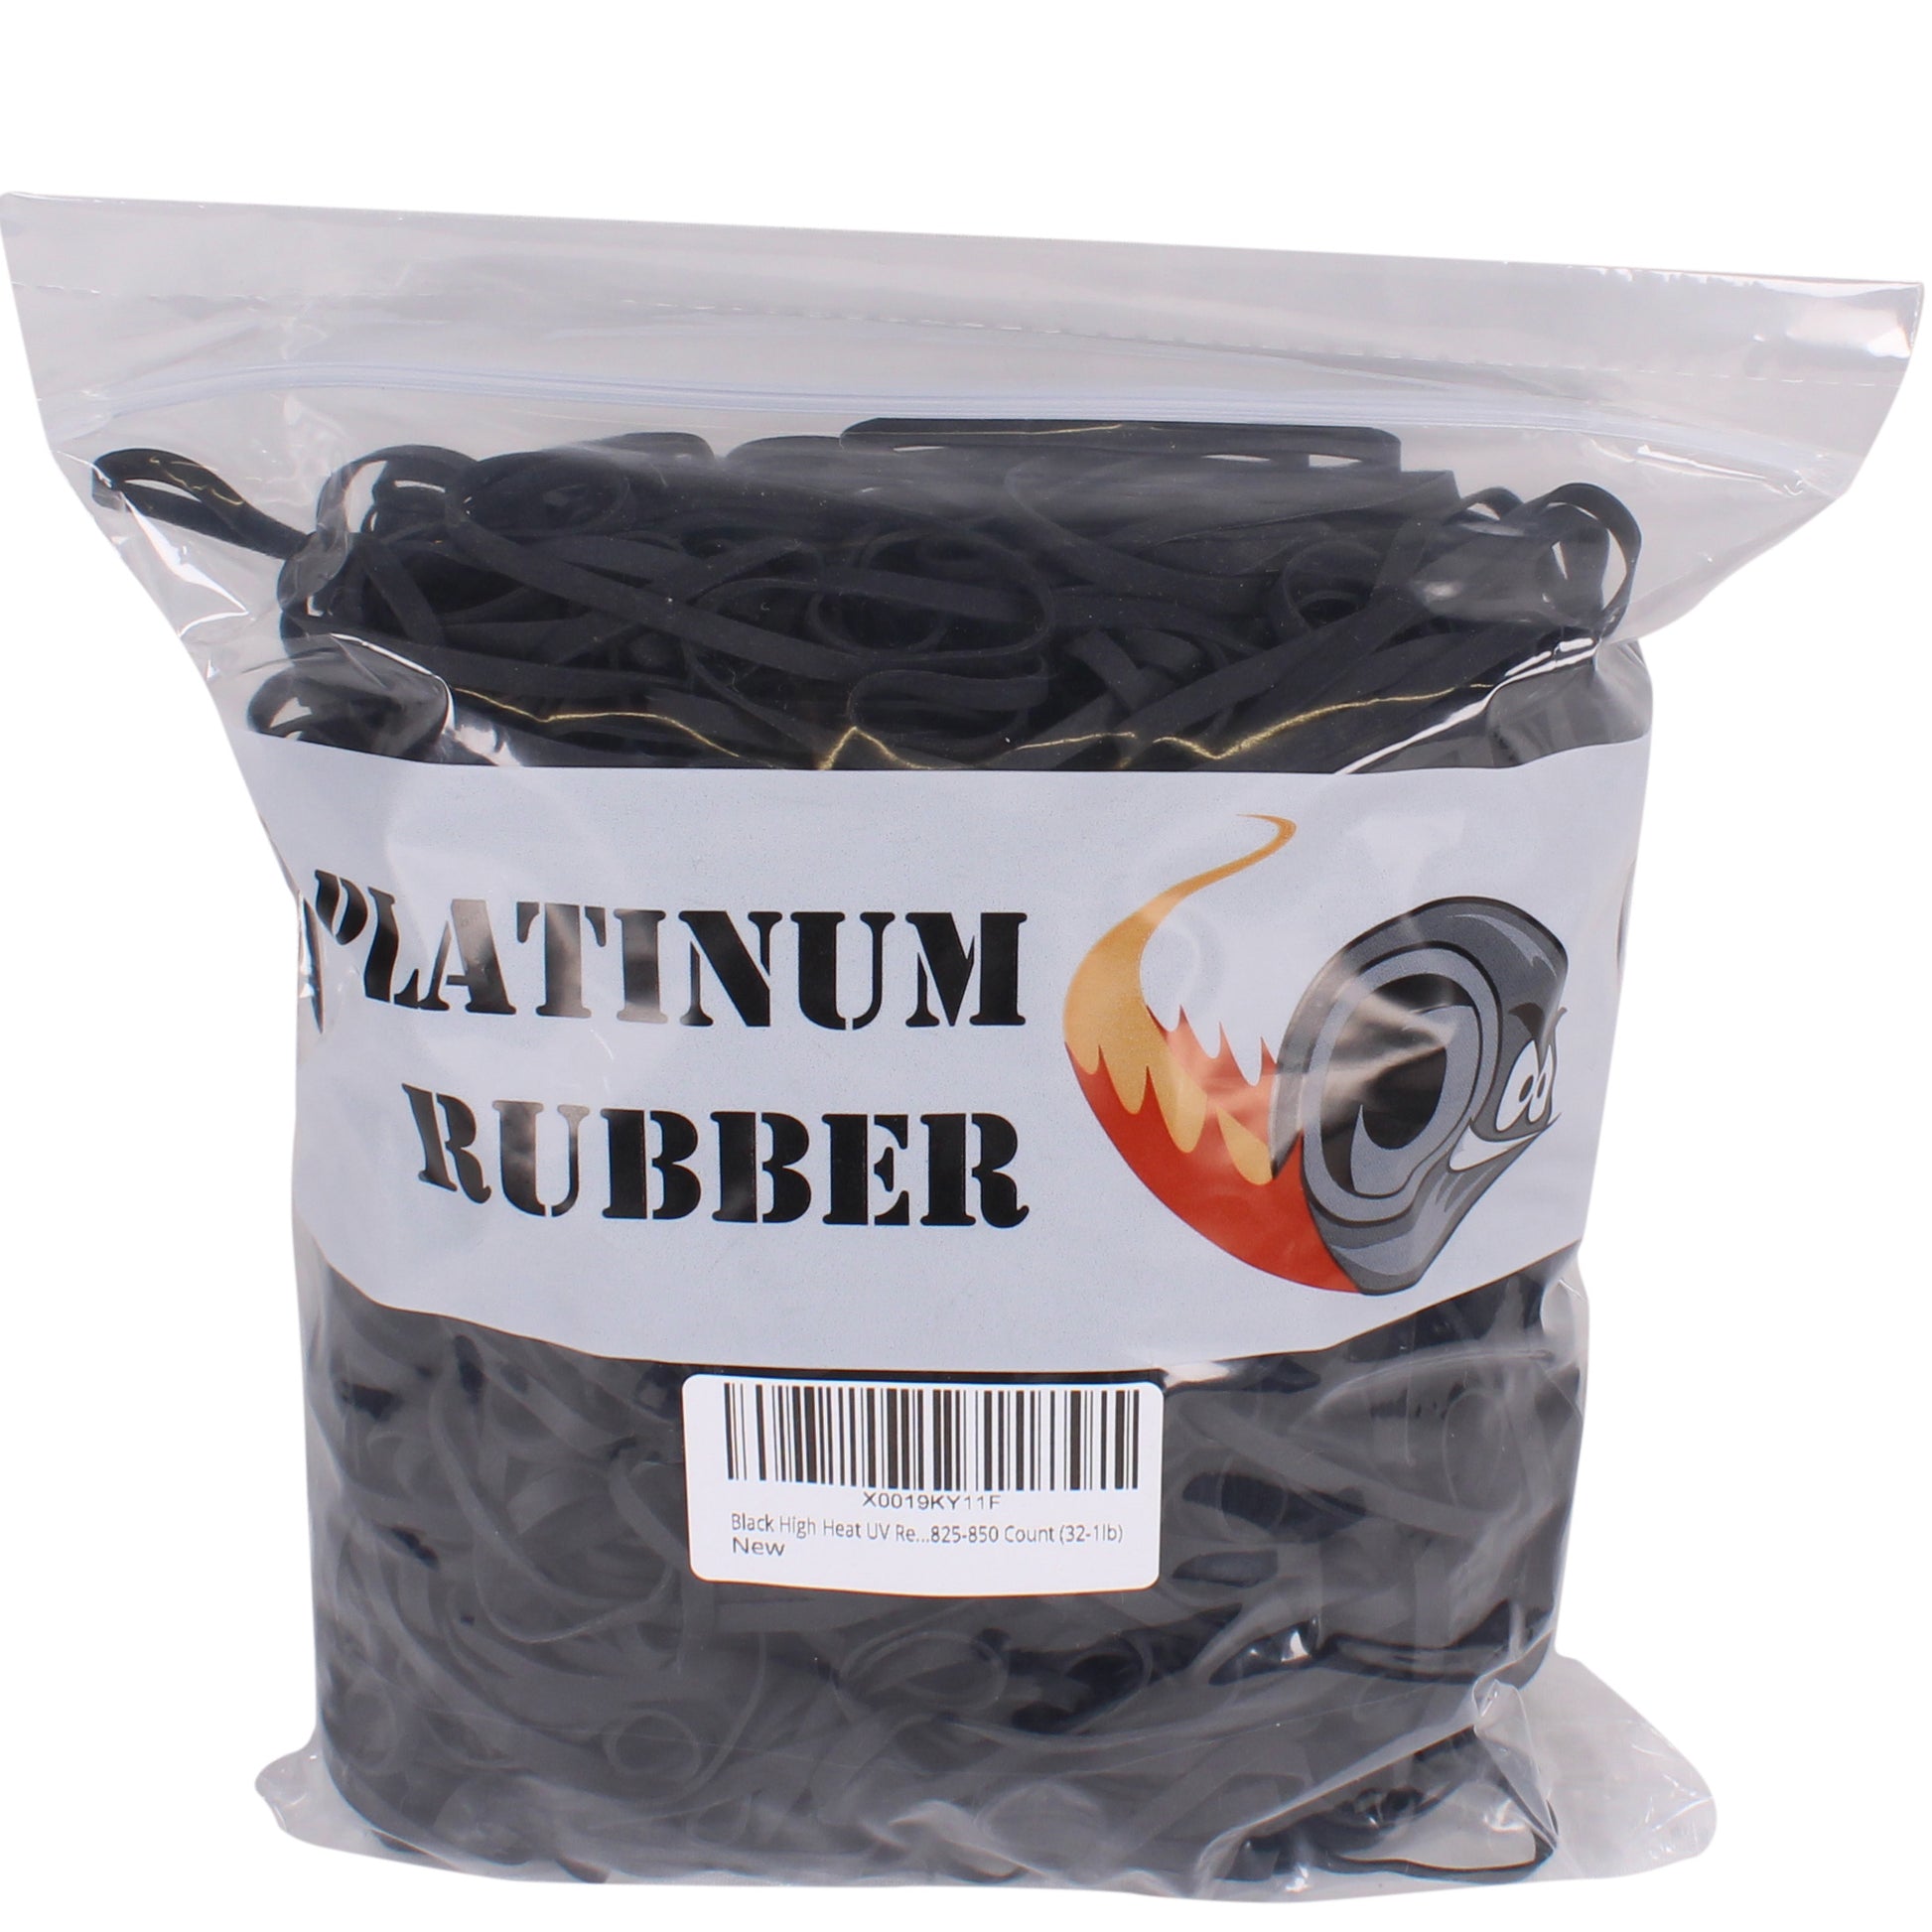 3-1/2 x 1/8 x 1/32 #33 Natural Compound Rubber Bands - Subotnick  Packaging